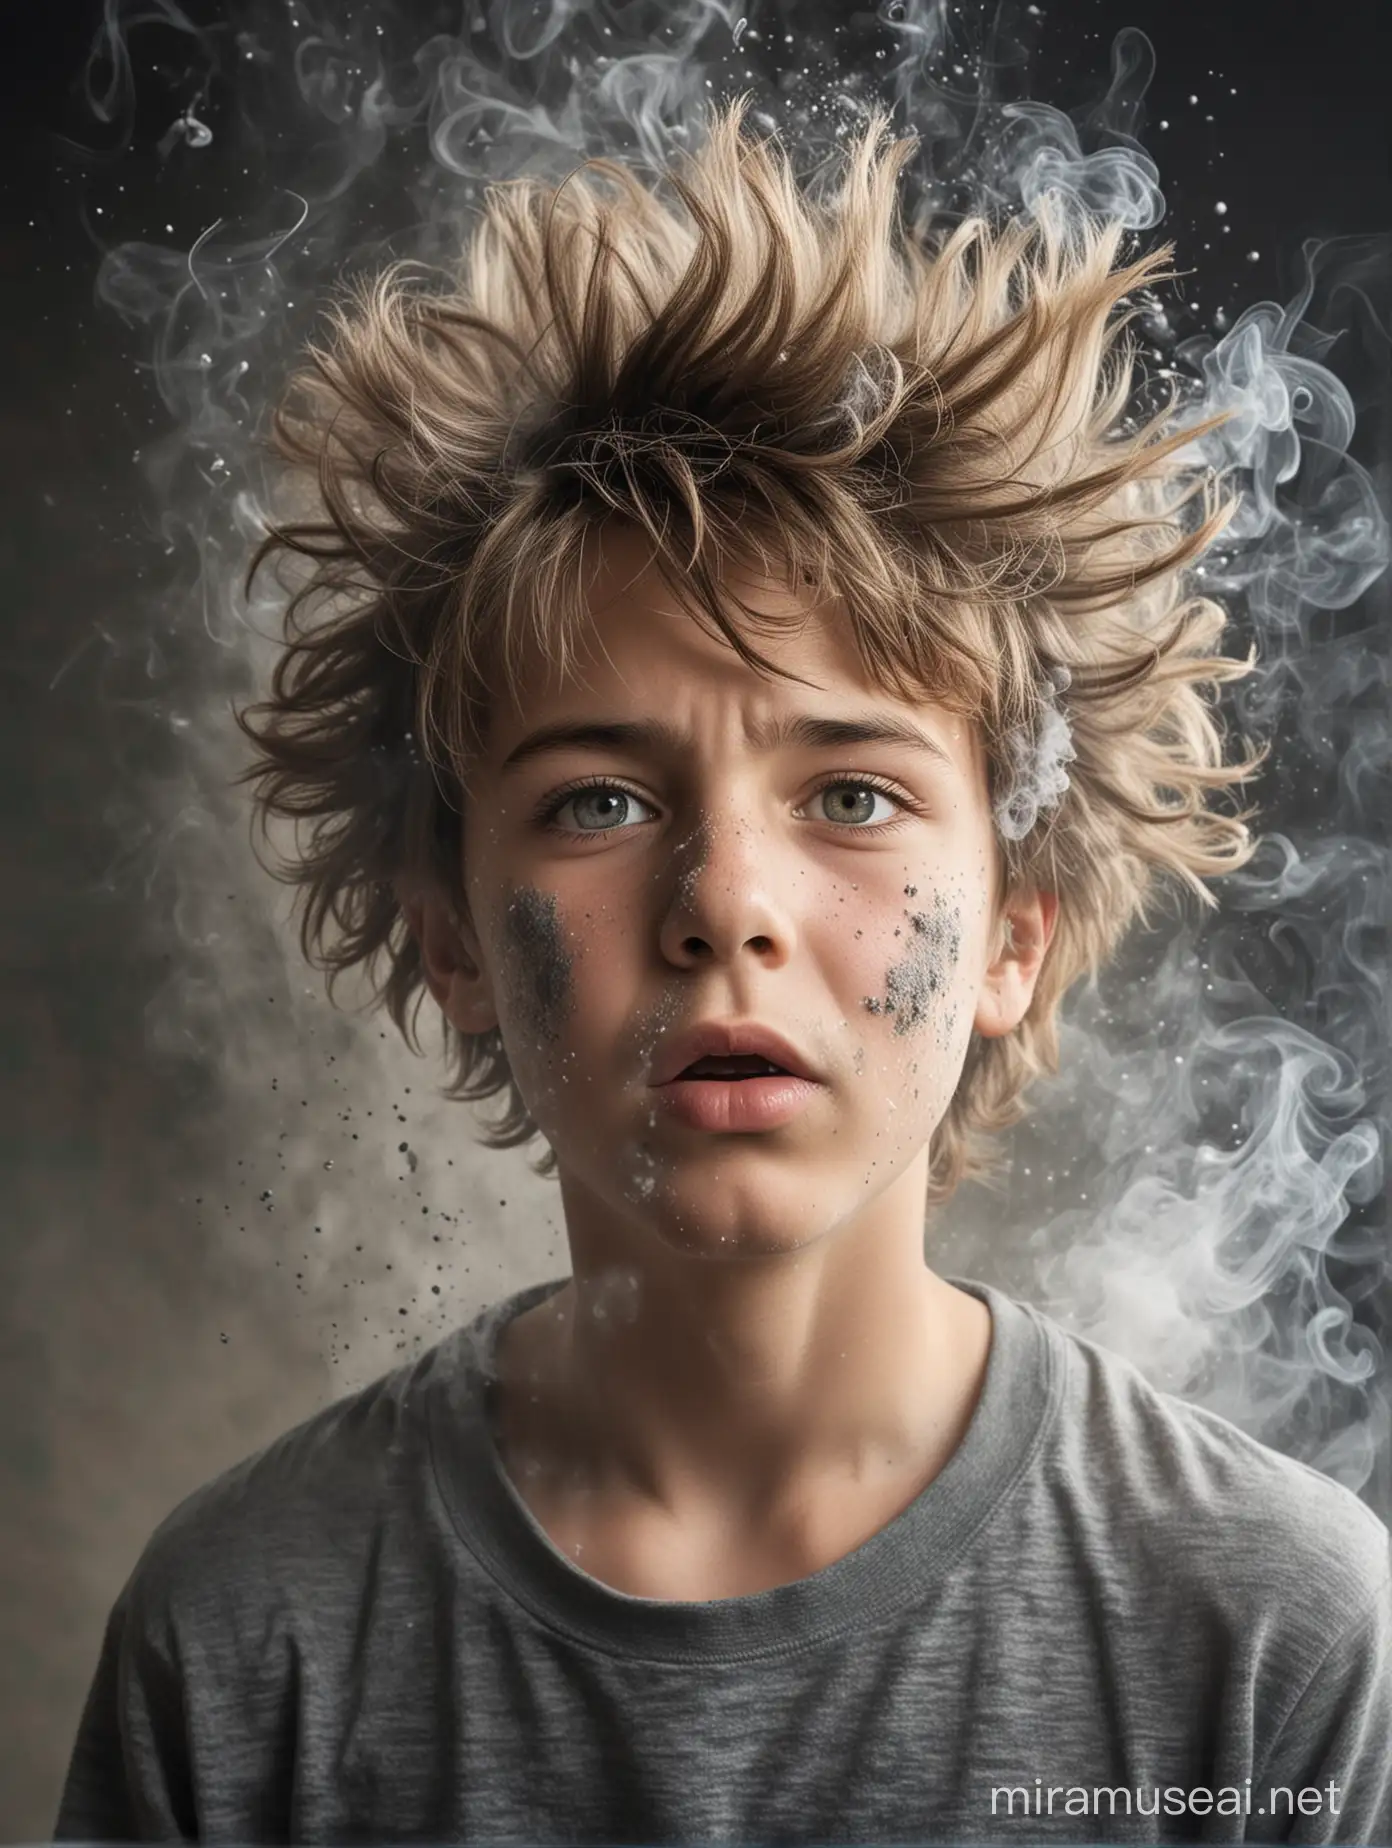 A boy is doing a experiment, the experiment explodes, the boy's face is full of smoke and ash, his hair is wild